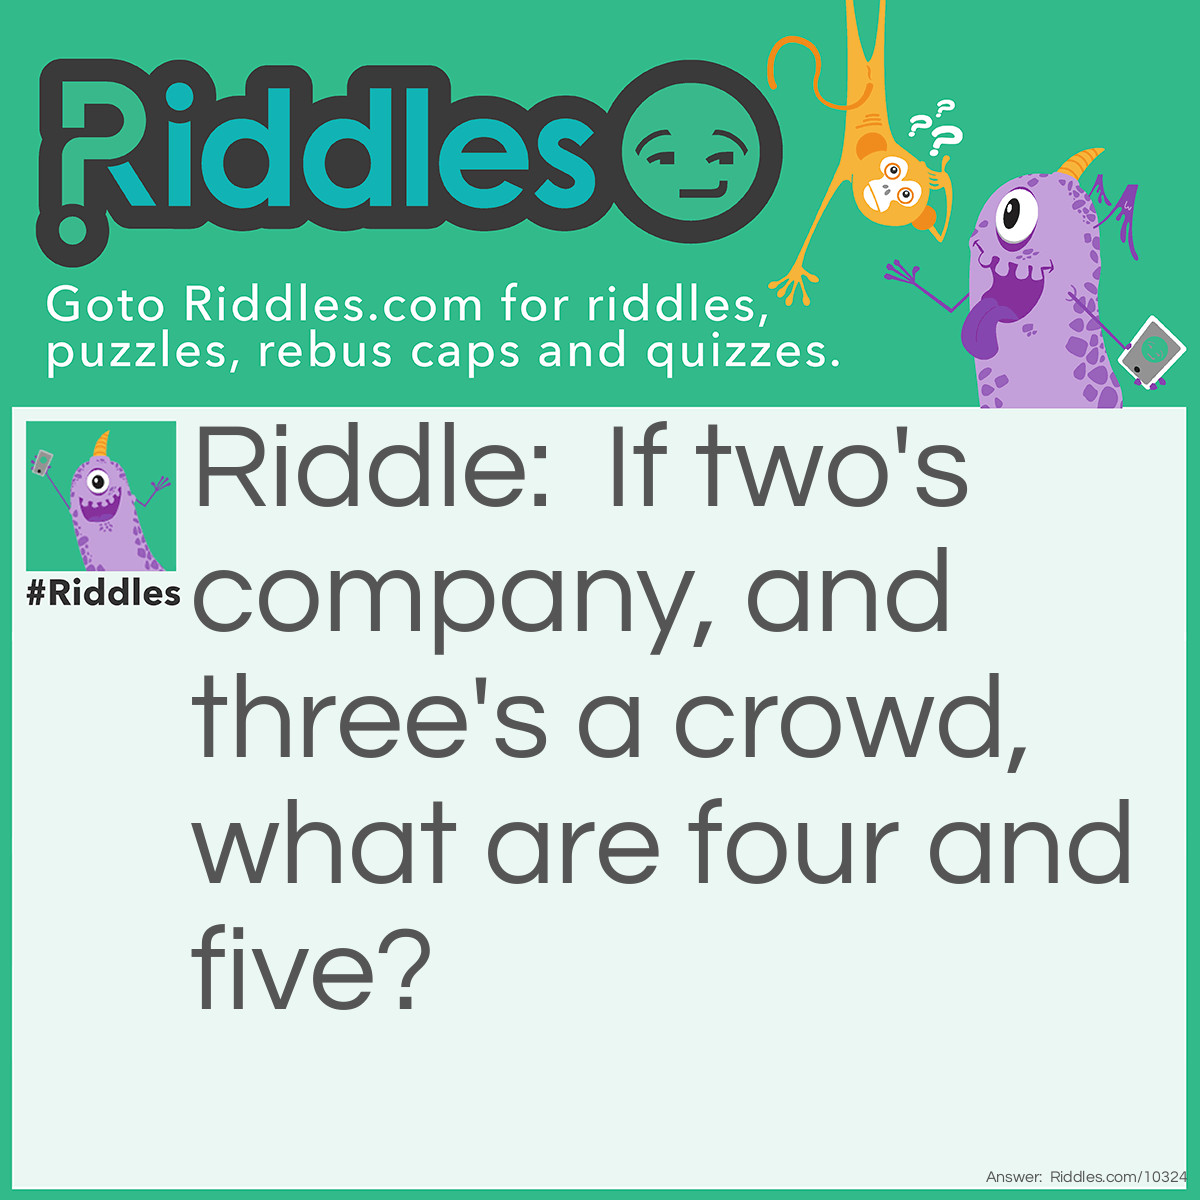 Riddle: If two's company, and three's a crowd, what are four and five? Answer: Nine.